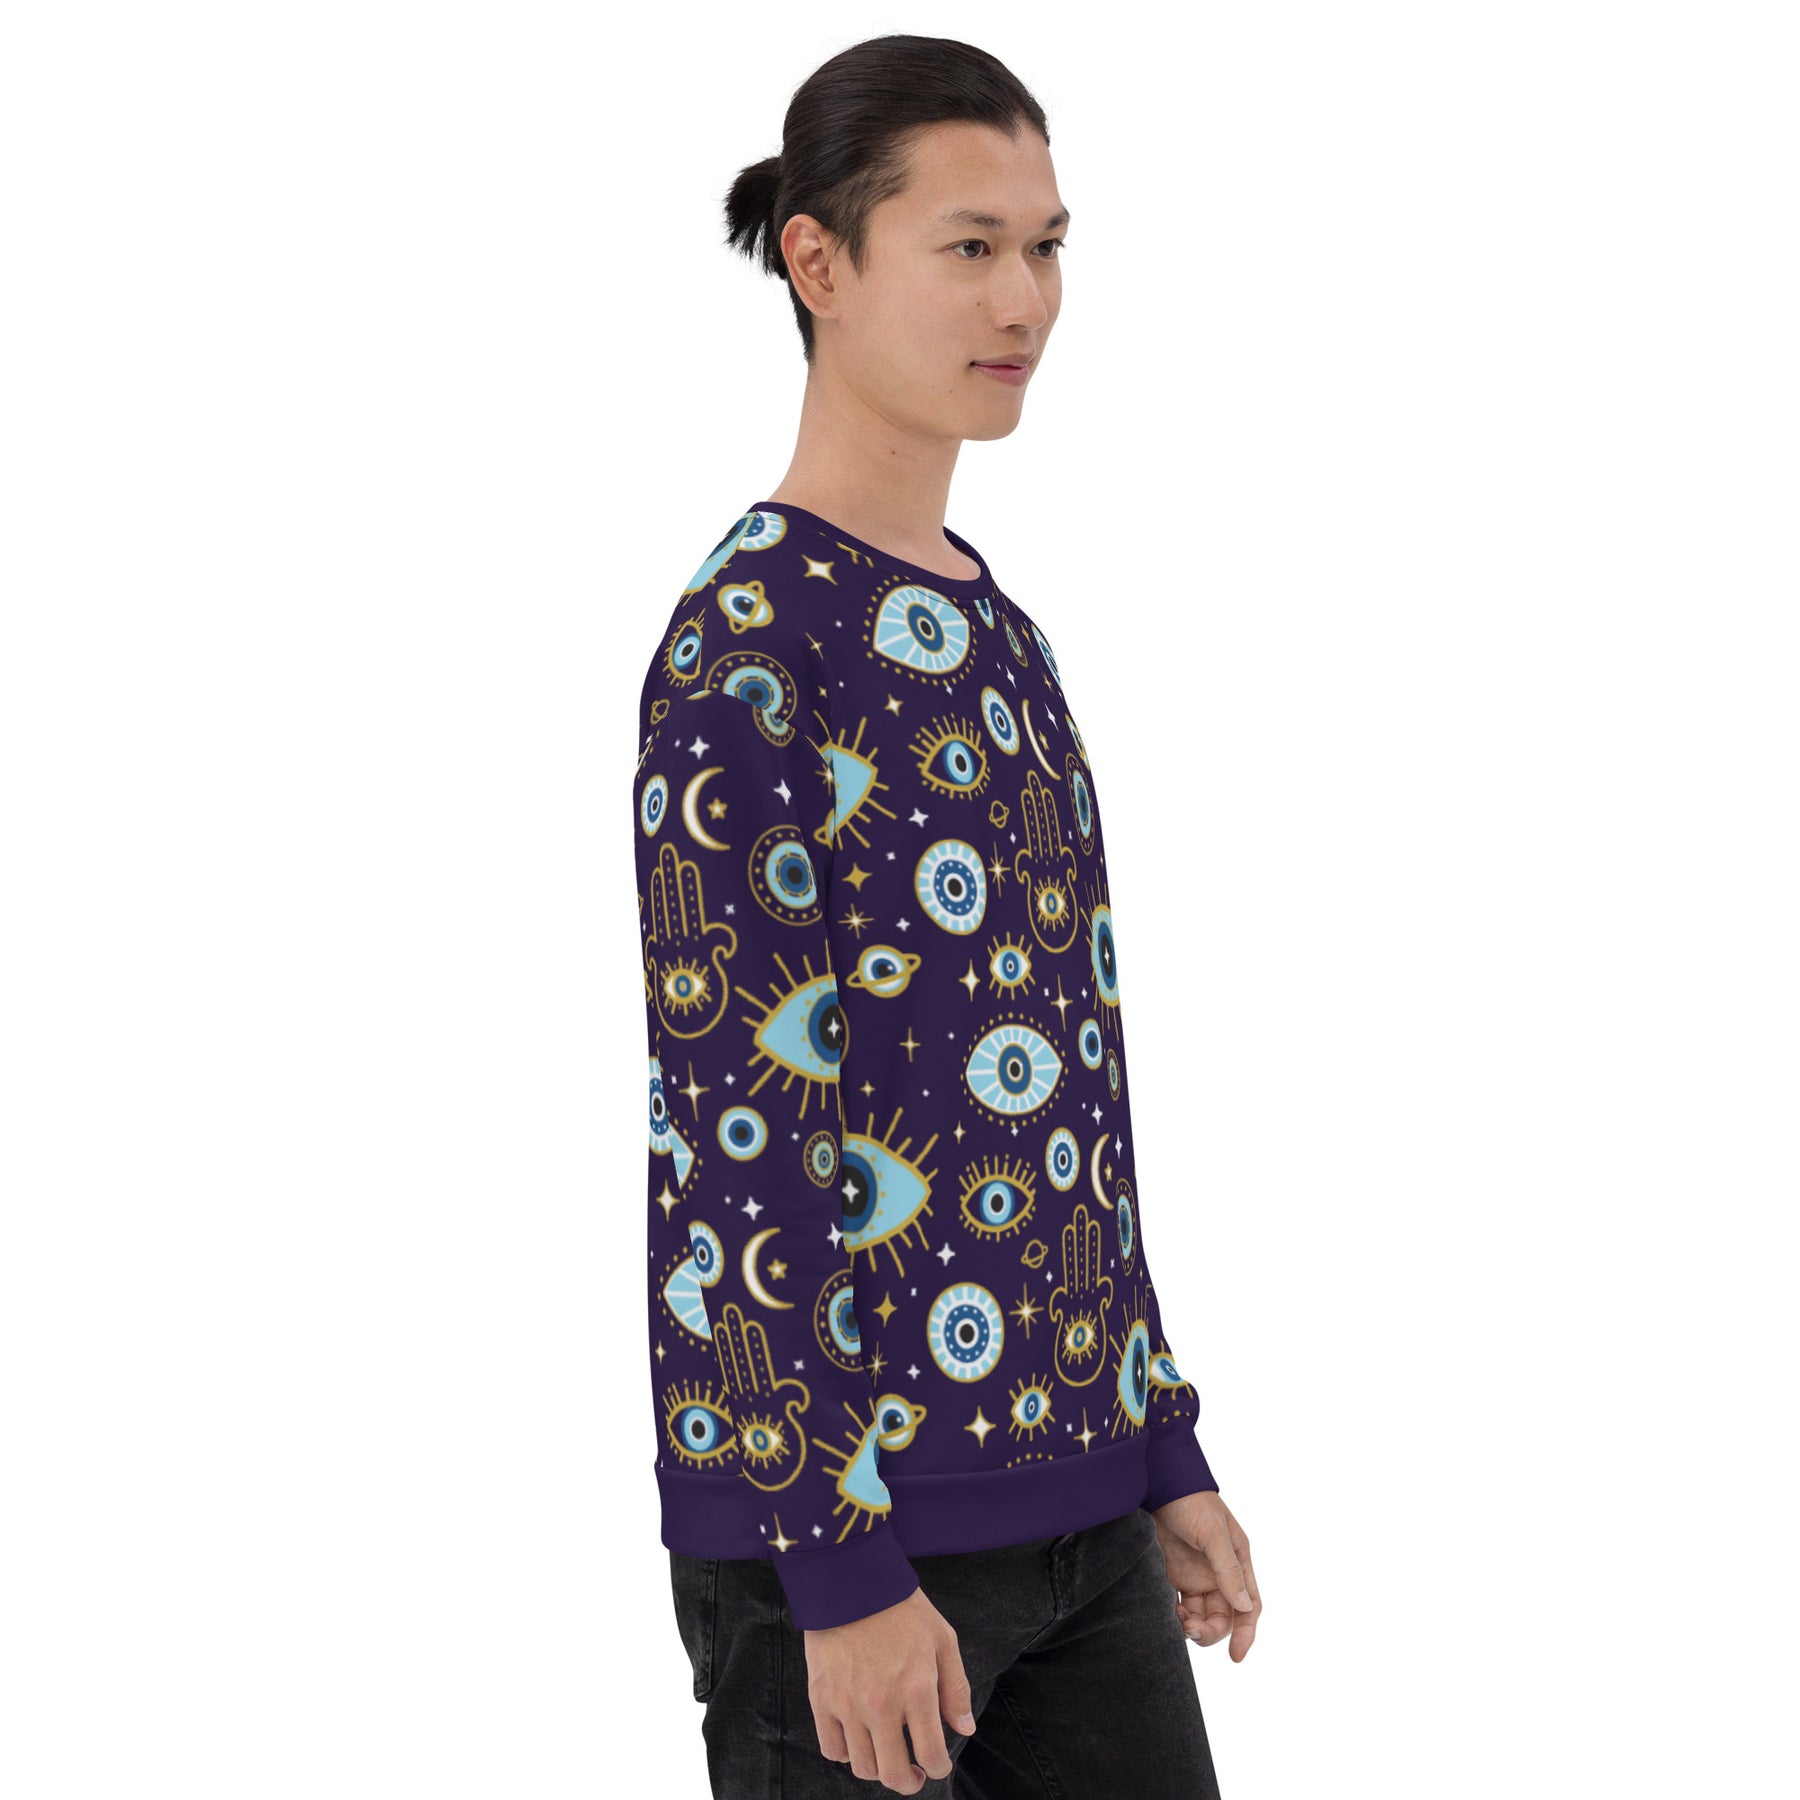 All Over Protection - Sweatshirt in Celestial Purple